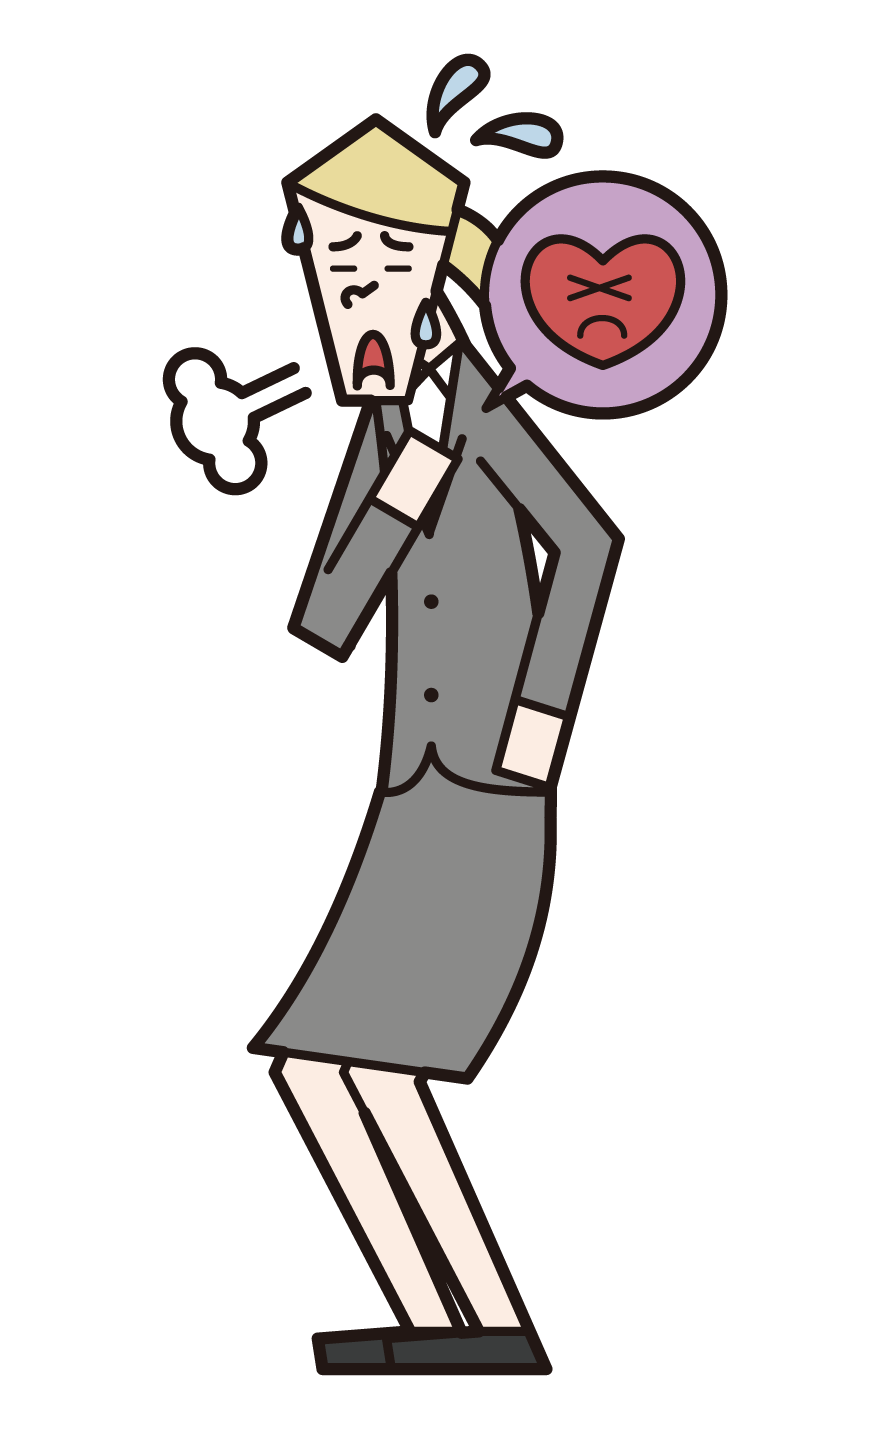 Illustration of a person (female) who feels palpitations